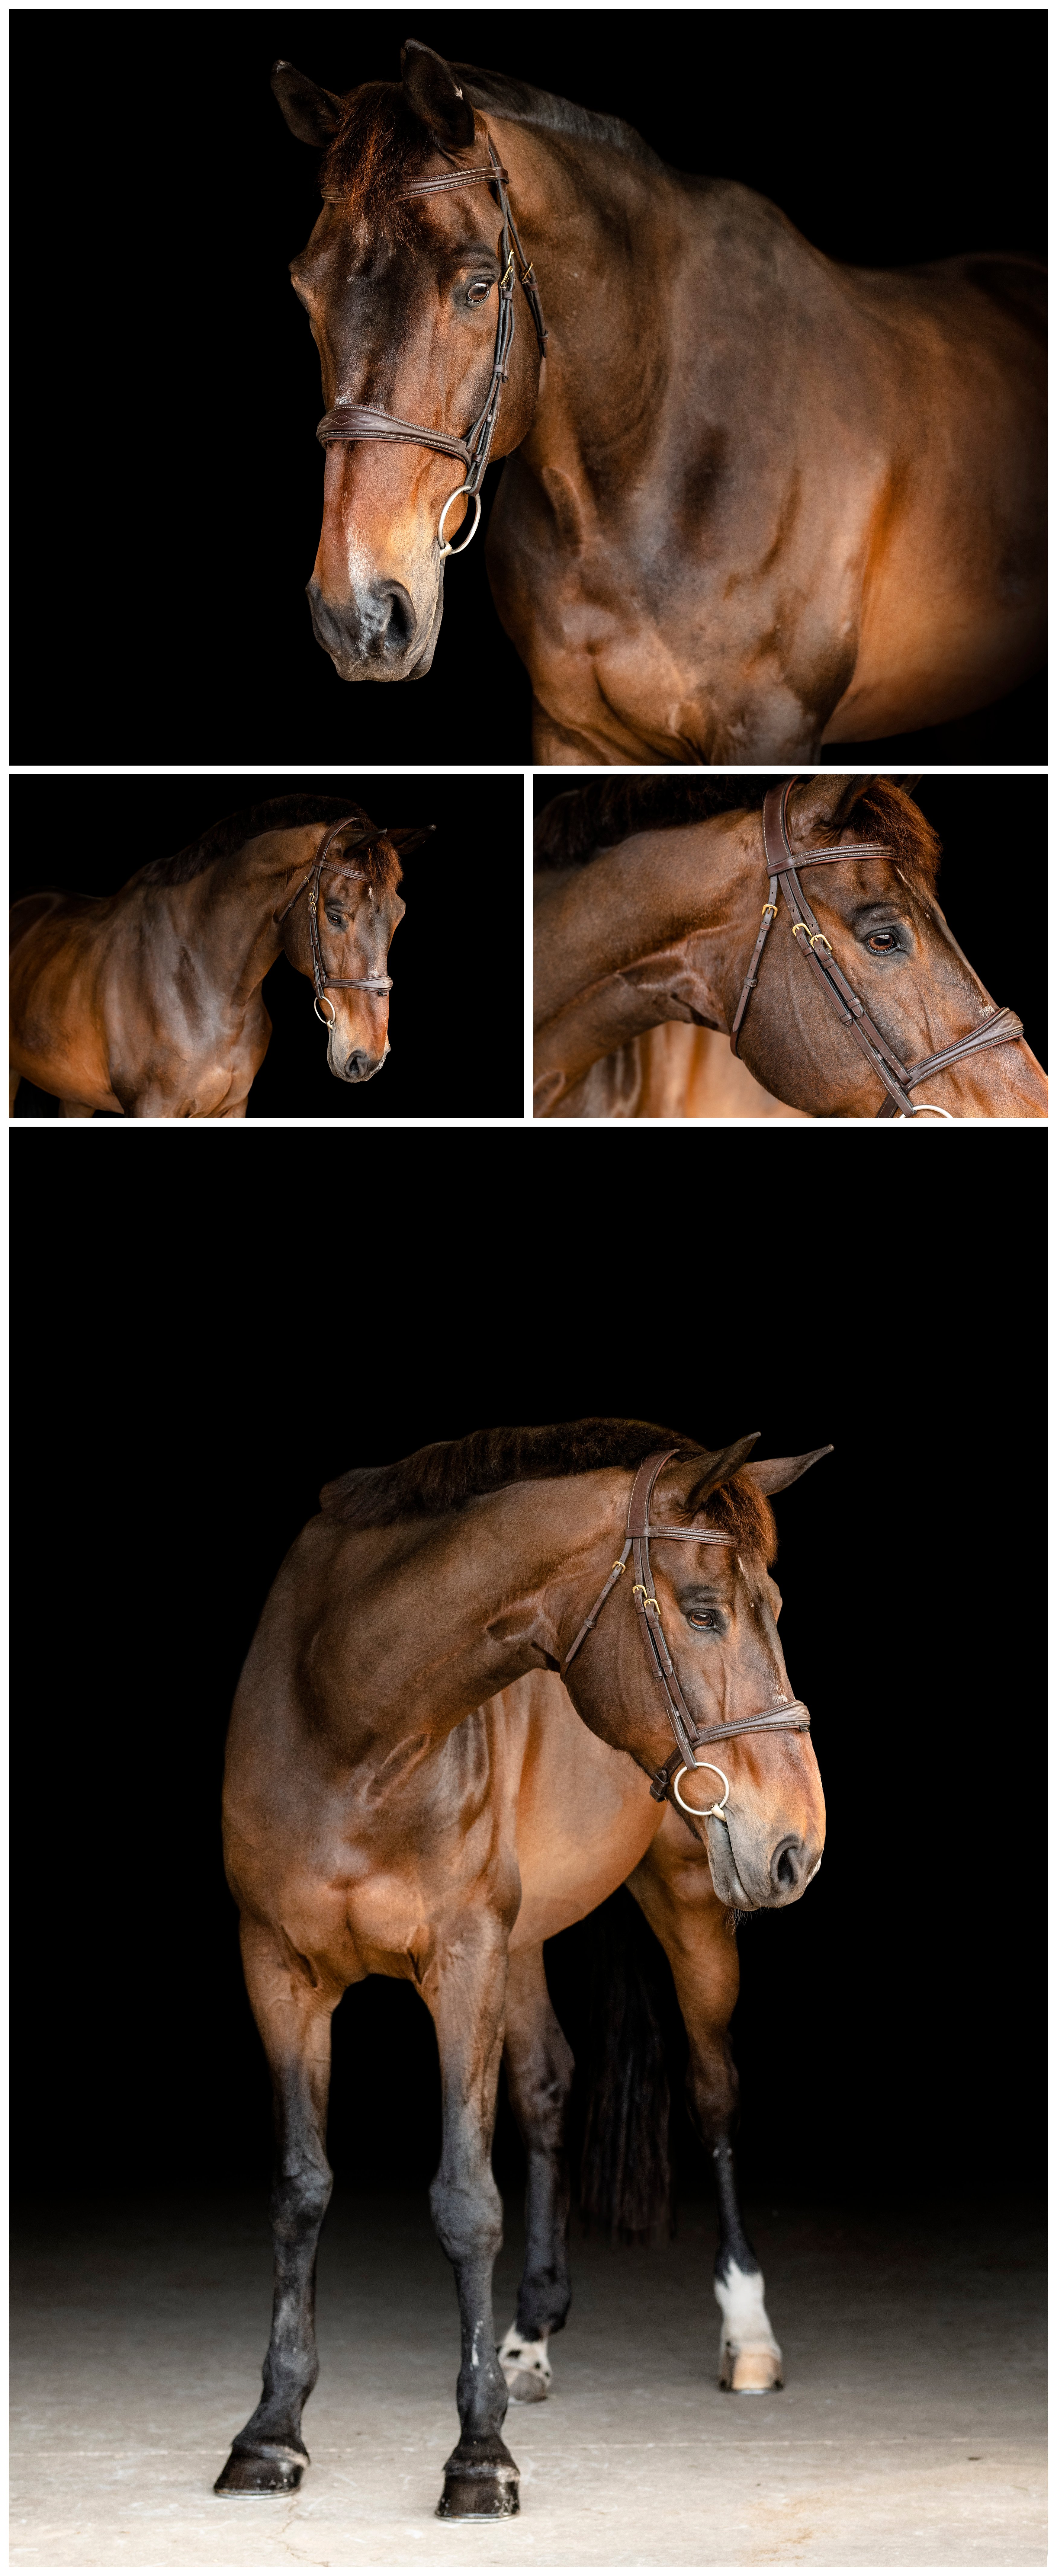 Ocala fineart horse photographer specializing in horse and rider and equine portraiture